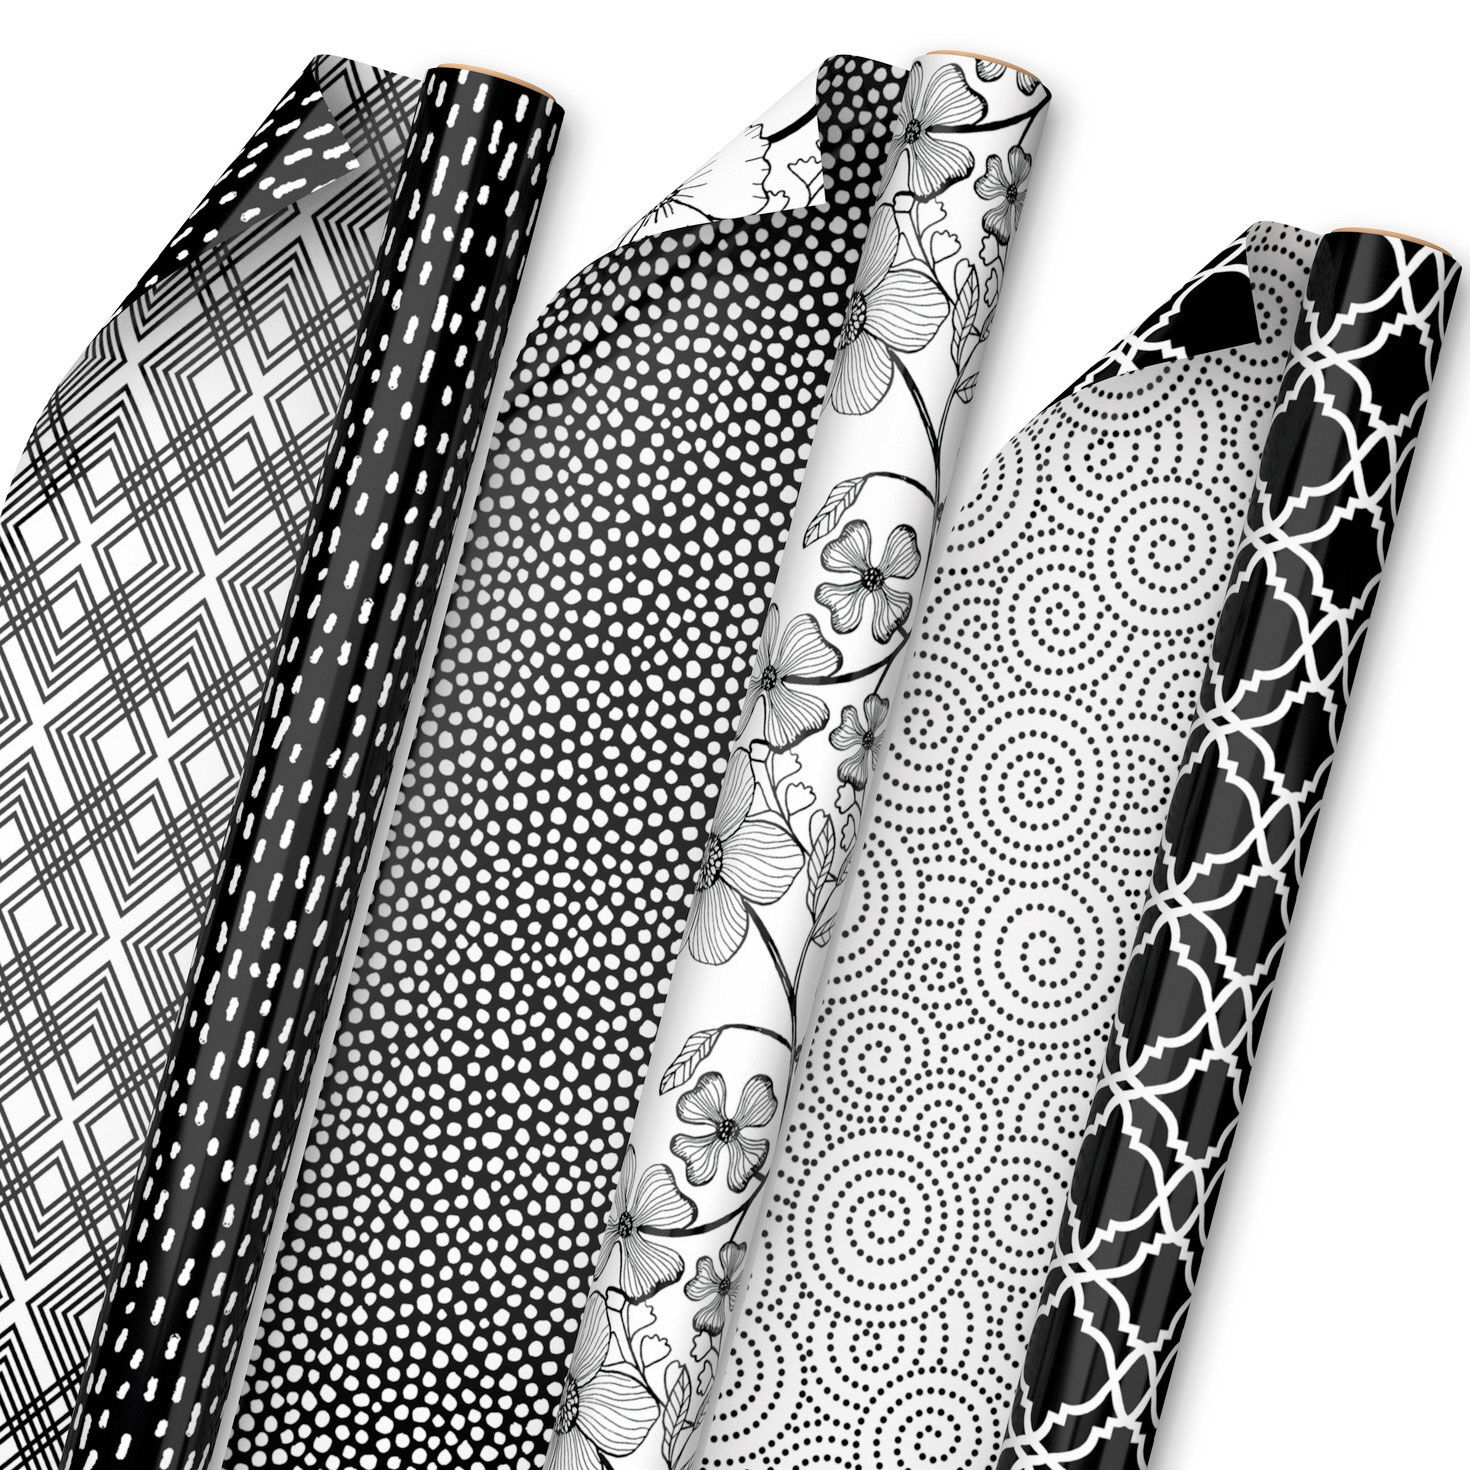 Black and White Prints 3-Pack Reversible Wrapping Paper, 75 sq. ft